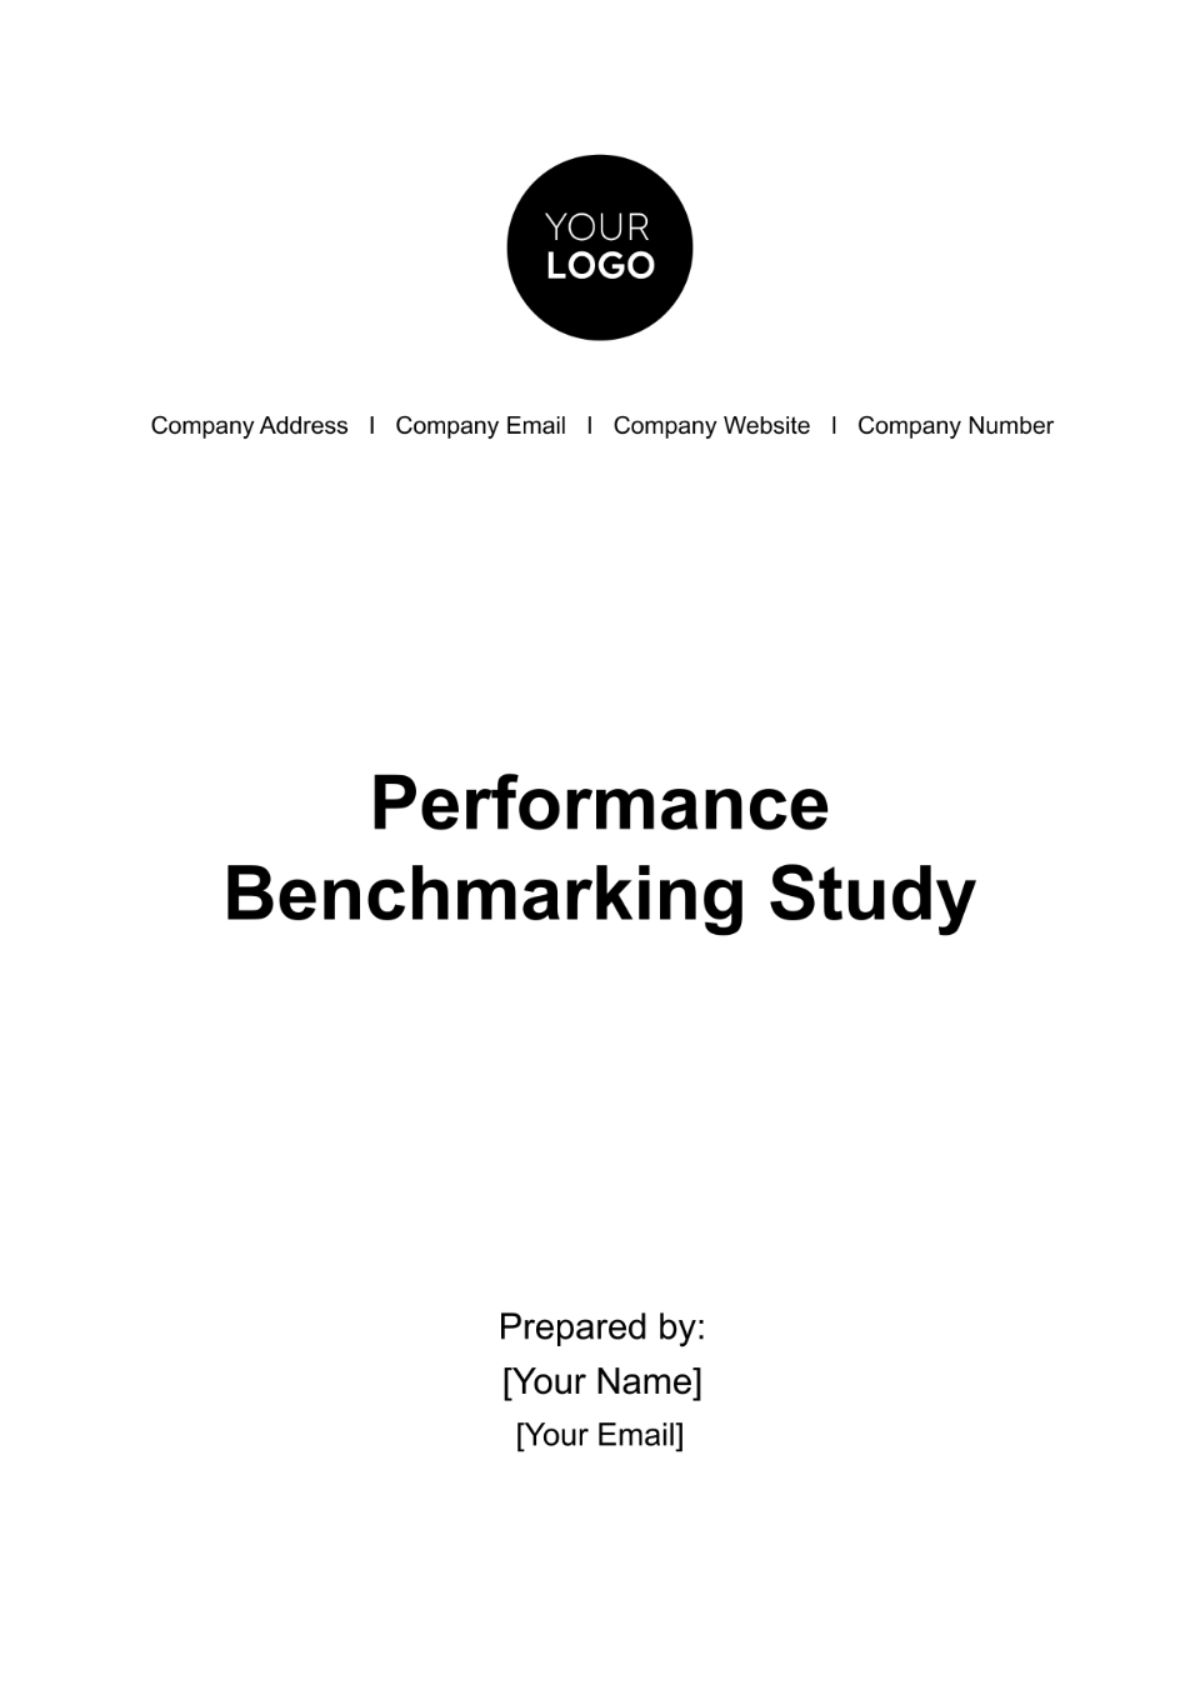 Free Performance Benchmarking Study HR Template